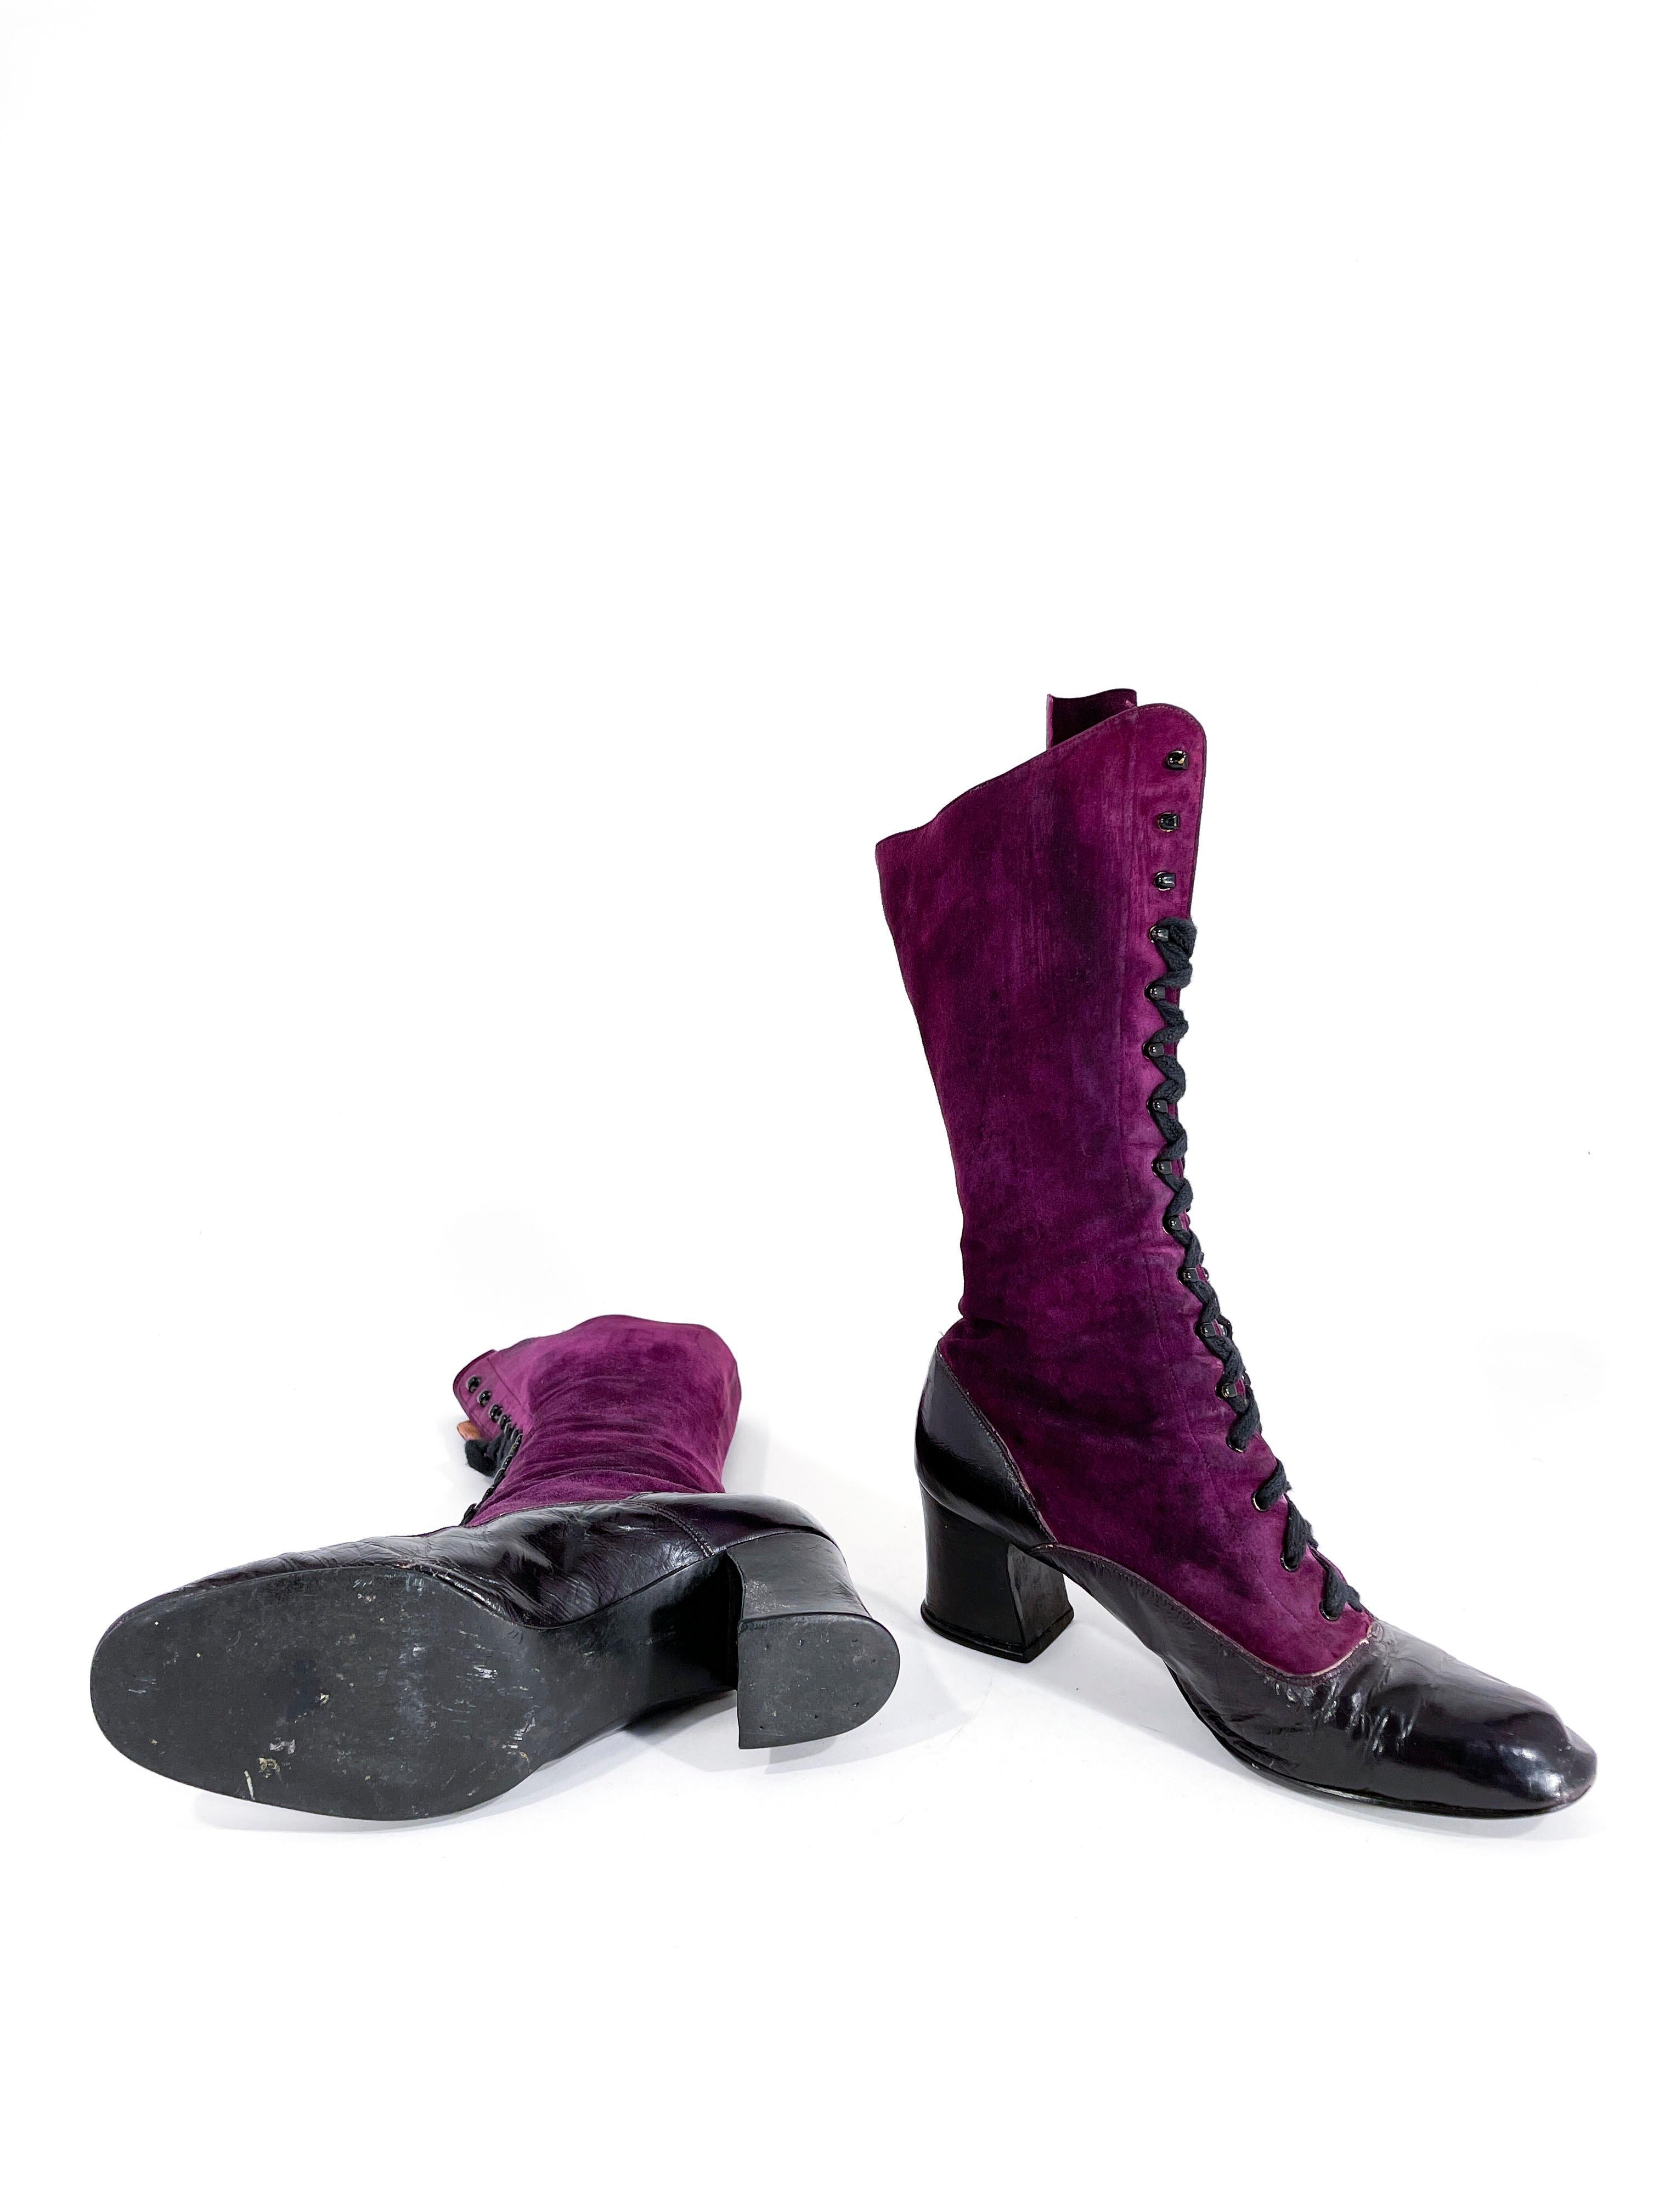 1970s Purple Suede and Black Boots For Sale 1